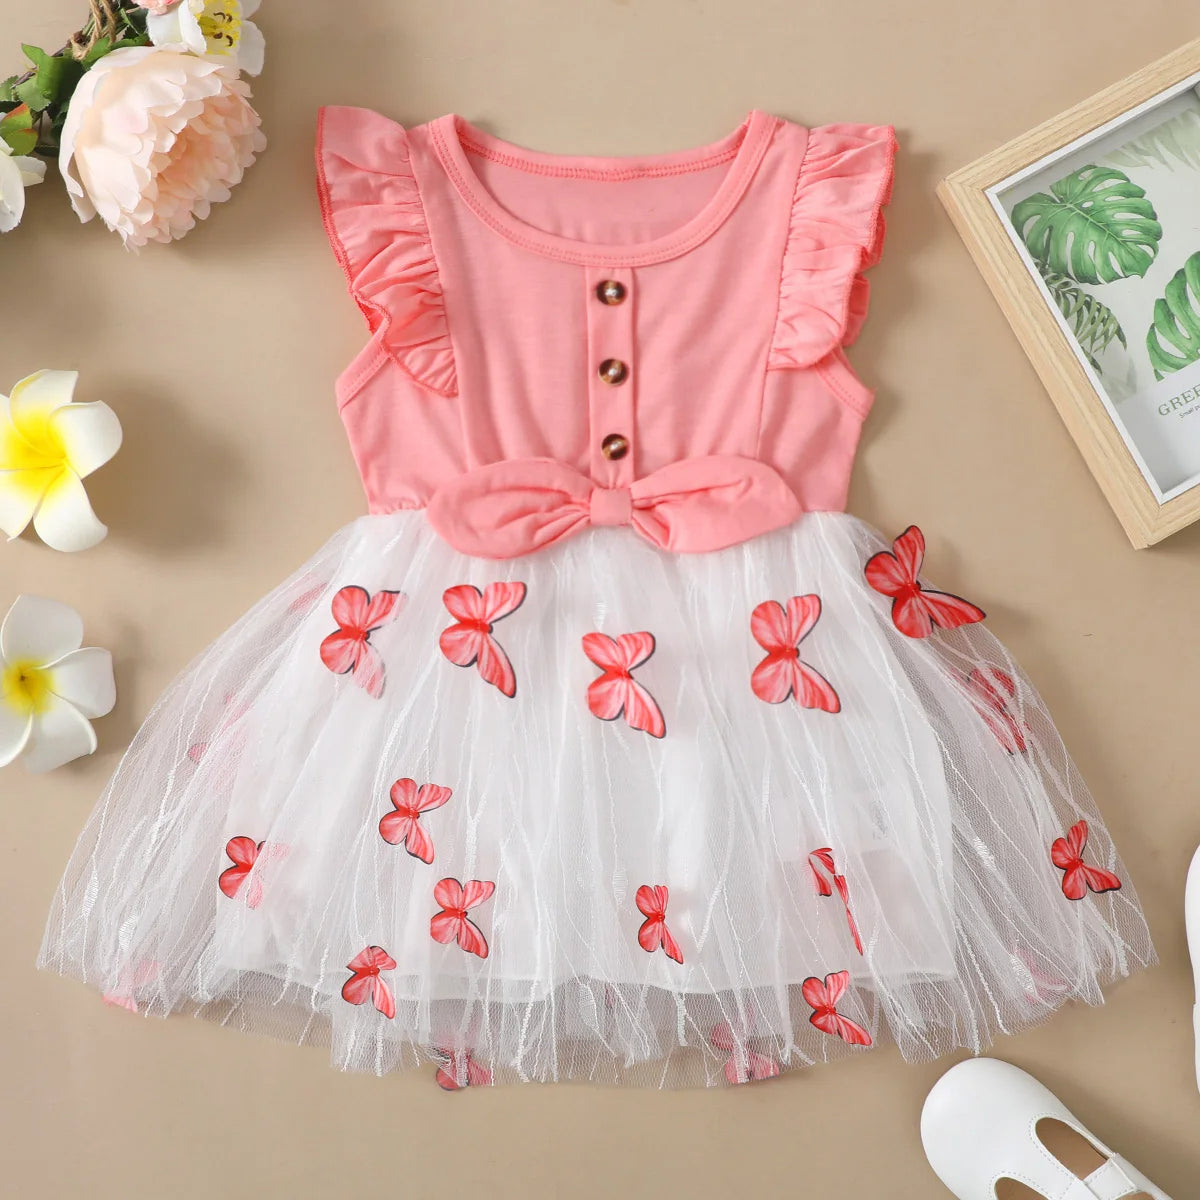 Butterfly Girls Tutu Party Dress For Toddlers